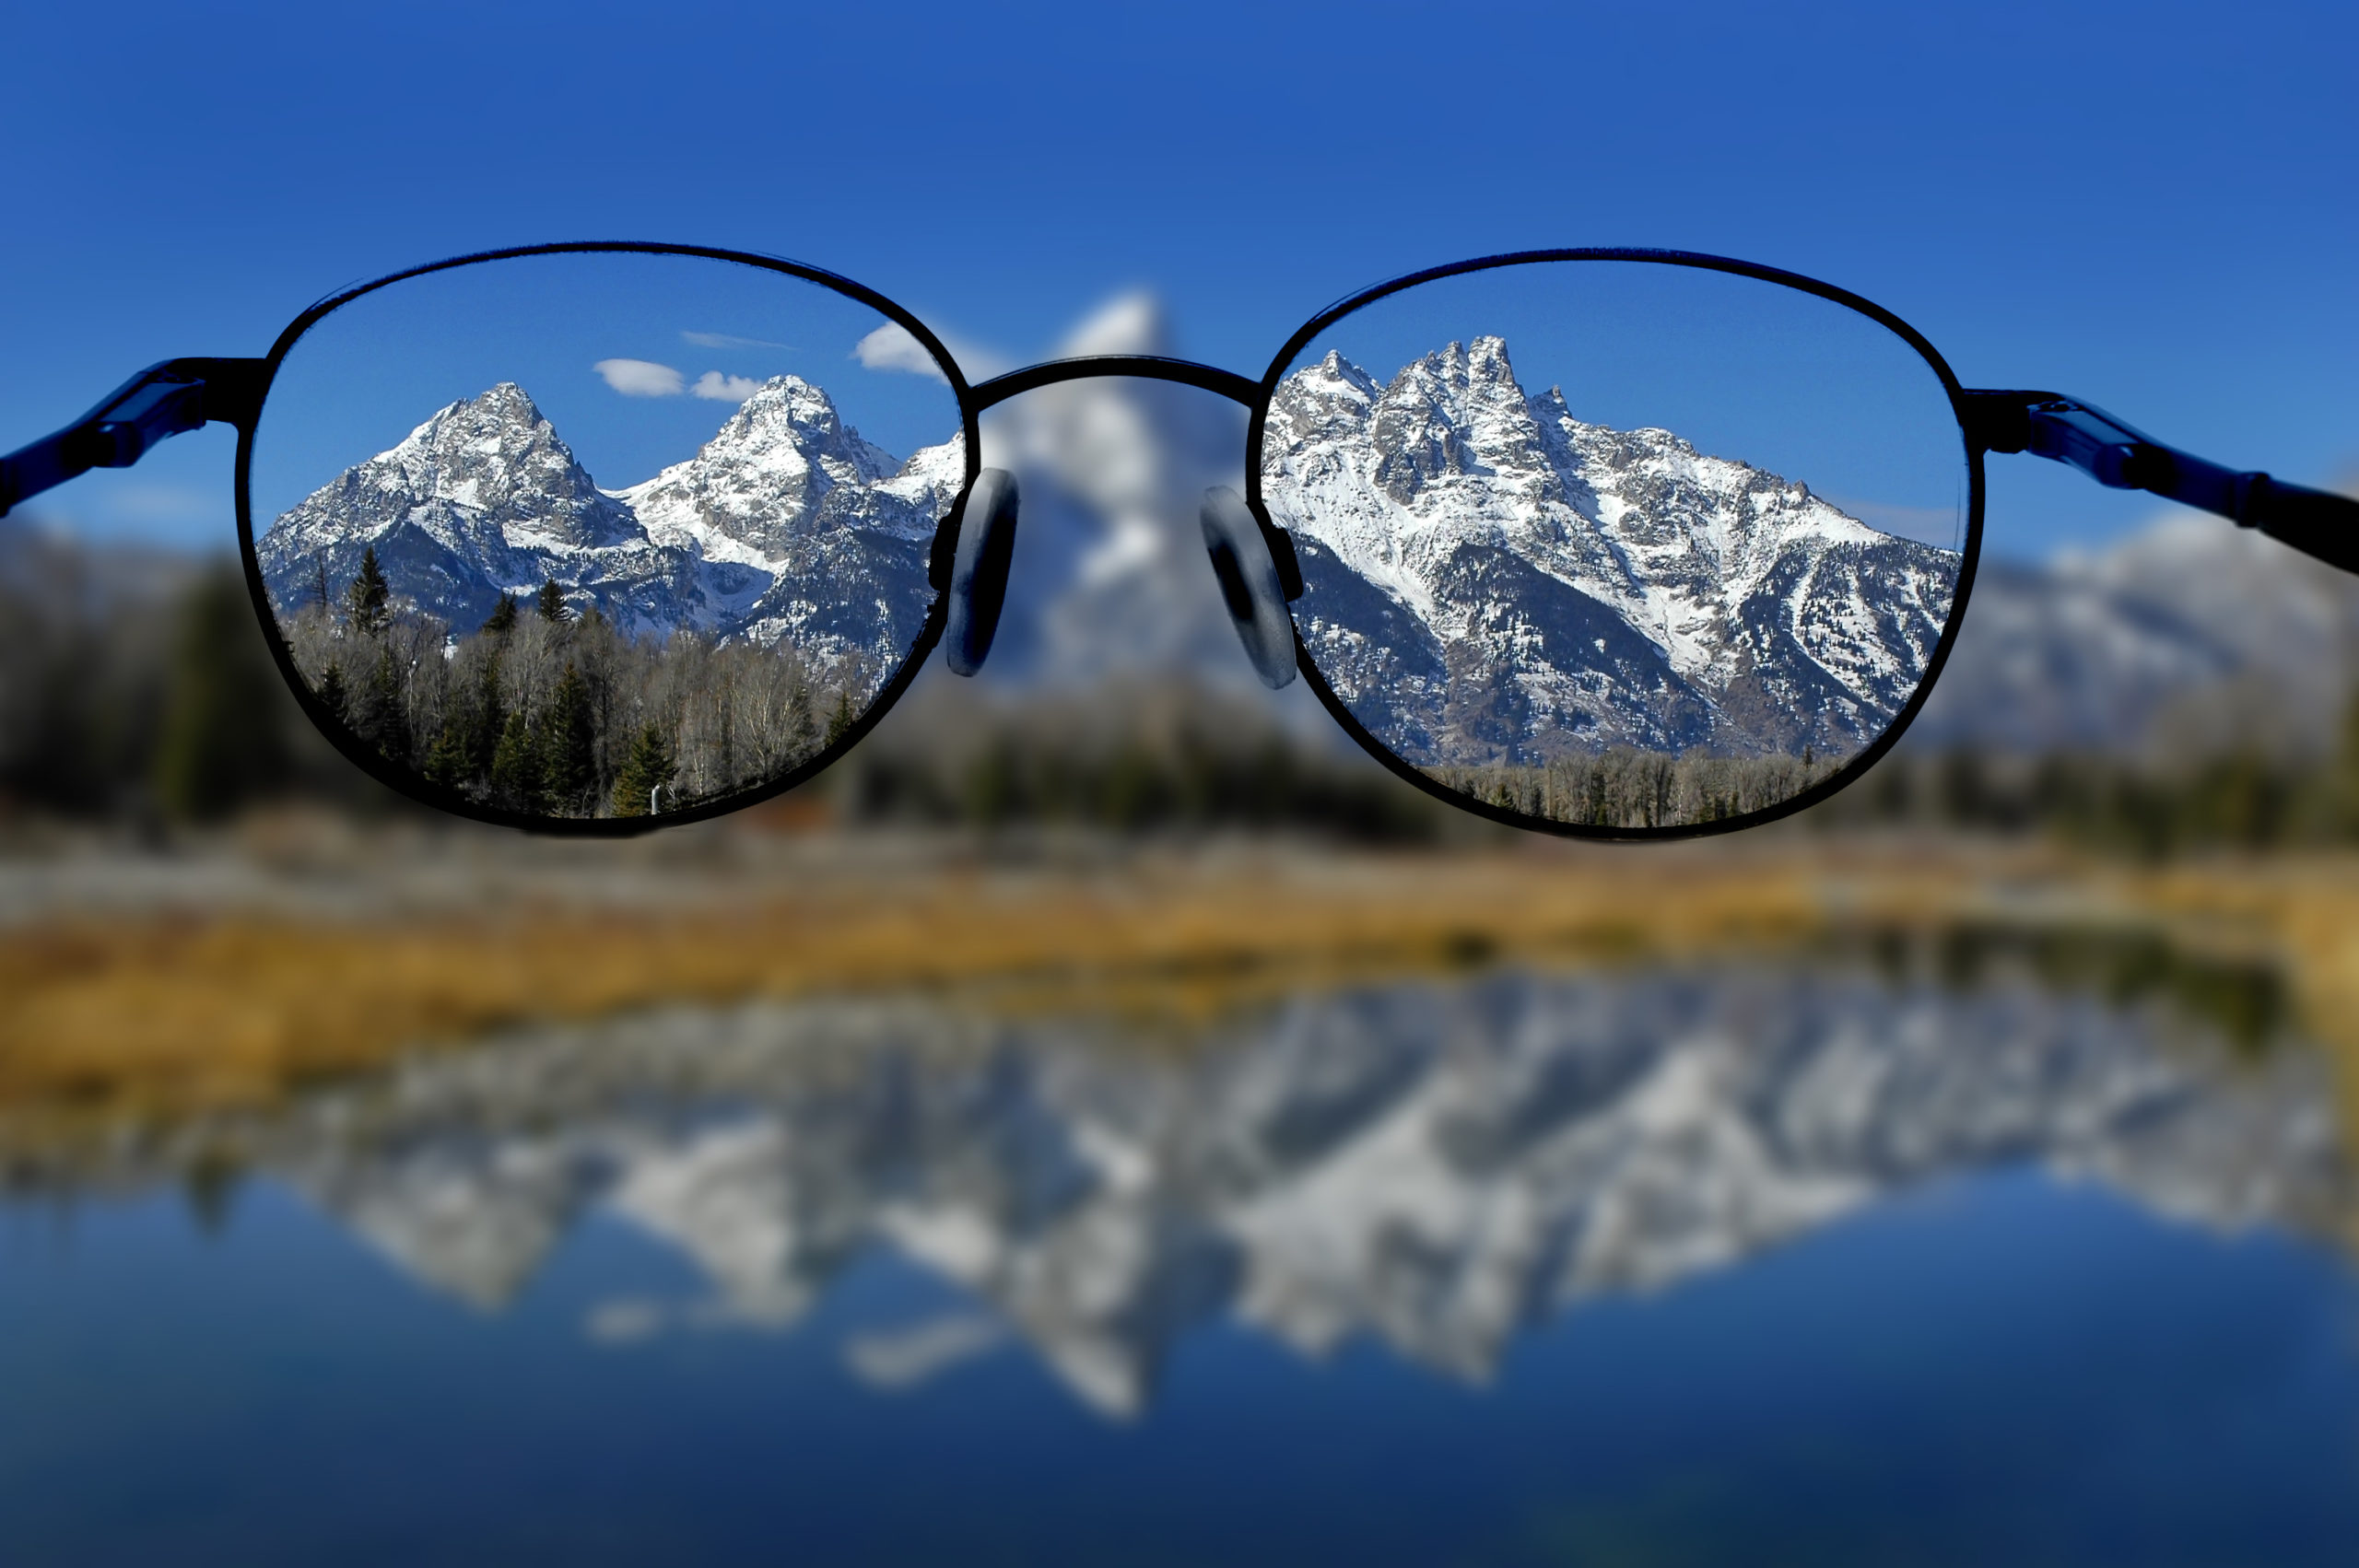 large pair of glasses sitting on mountains